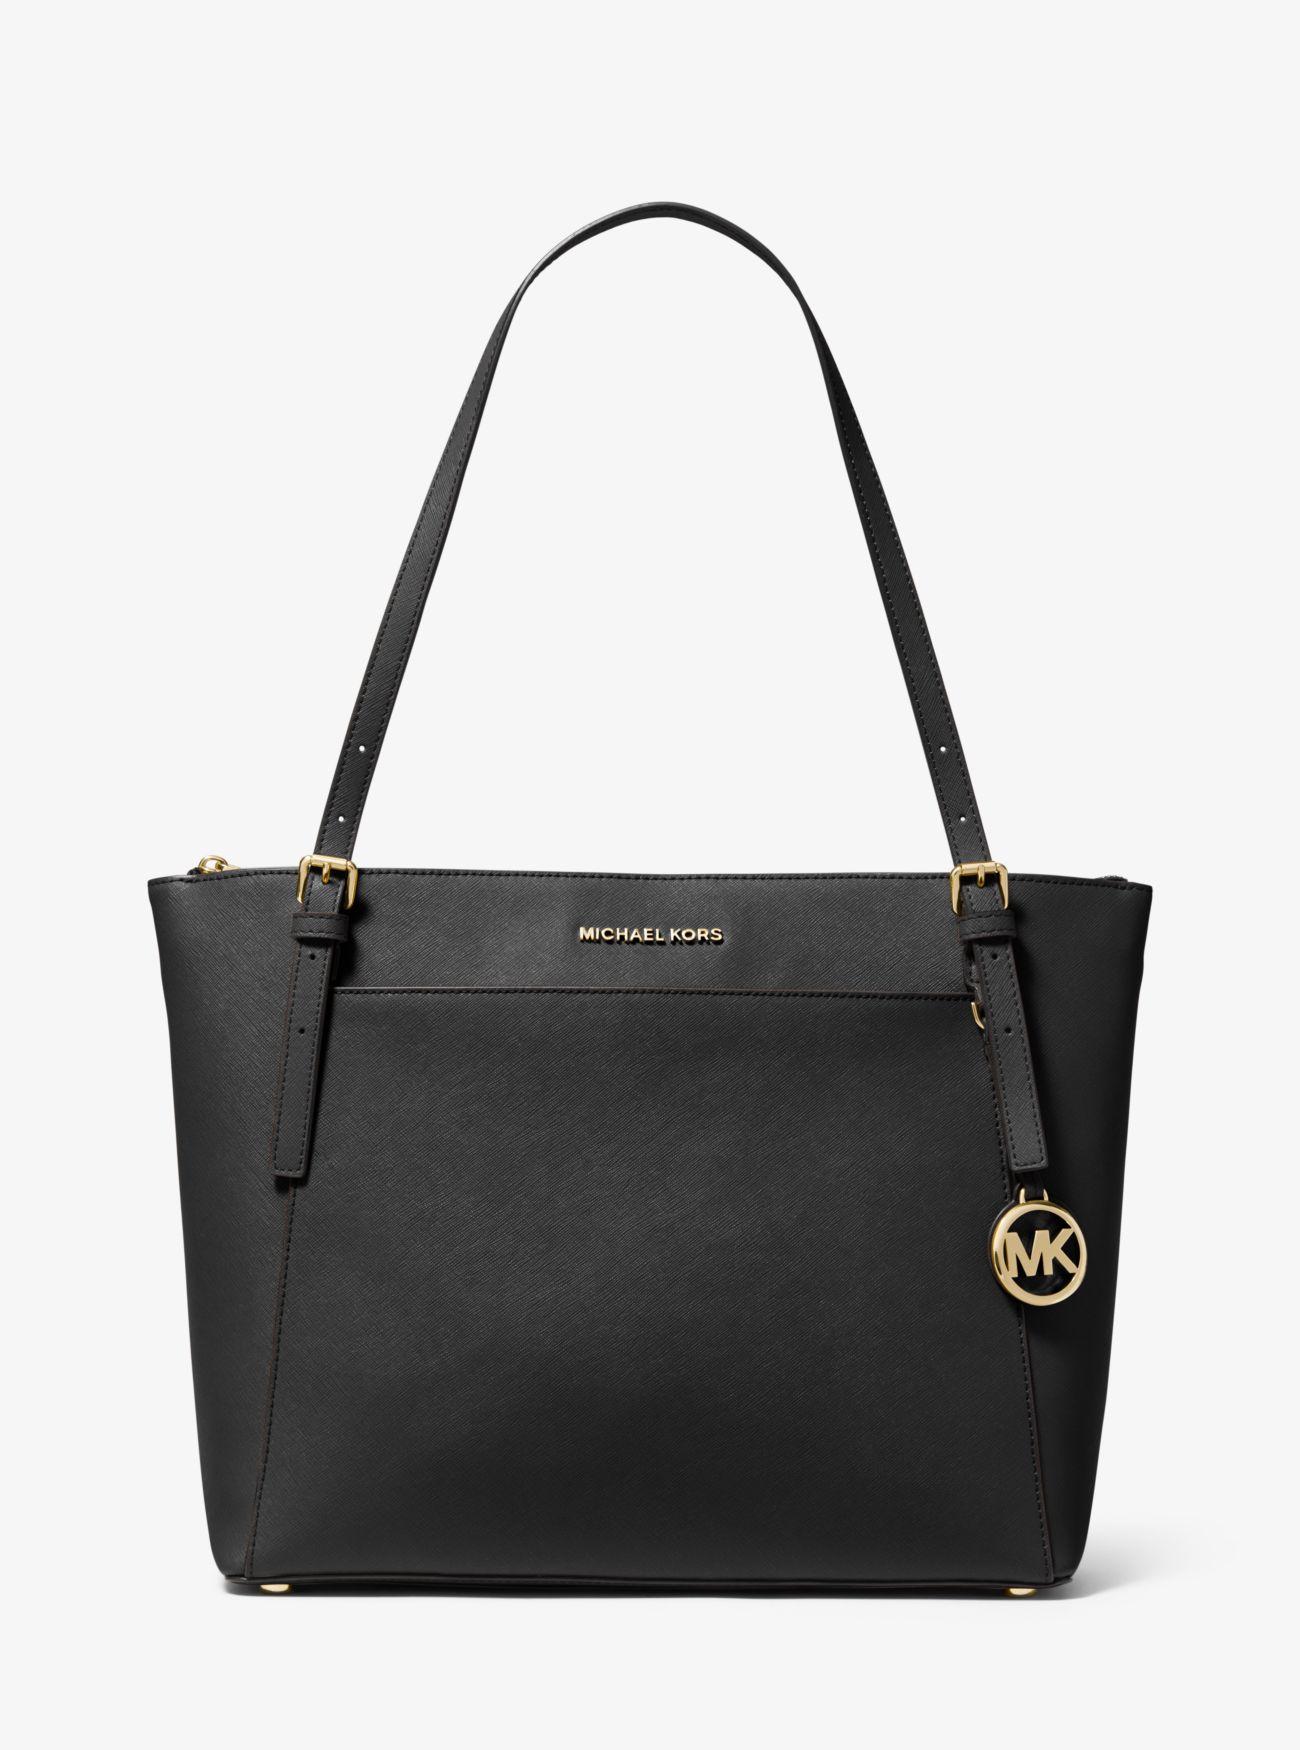 Michael Kors Voyager Large Leather Tote Bag in Brown (Gray) - Save 23% ...